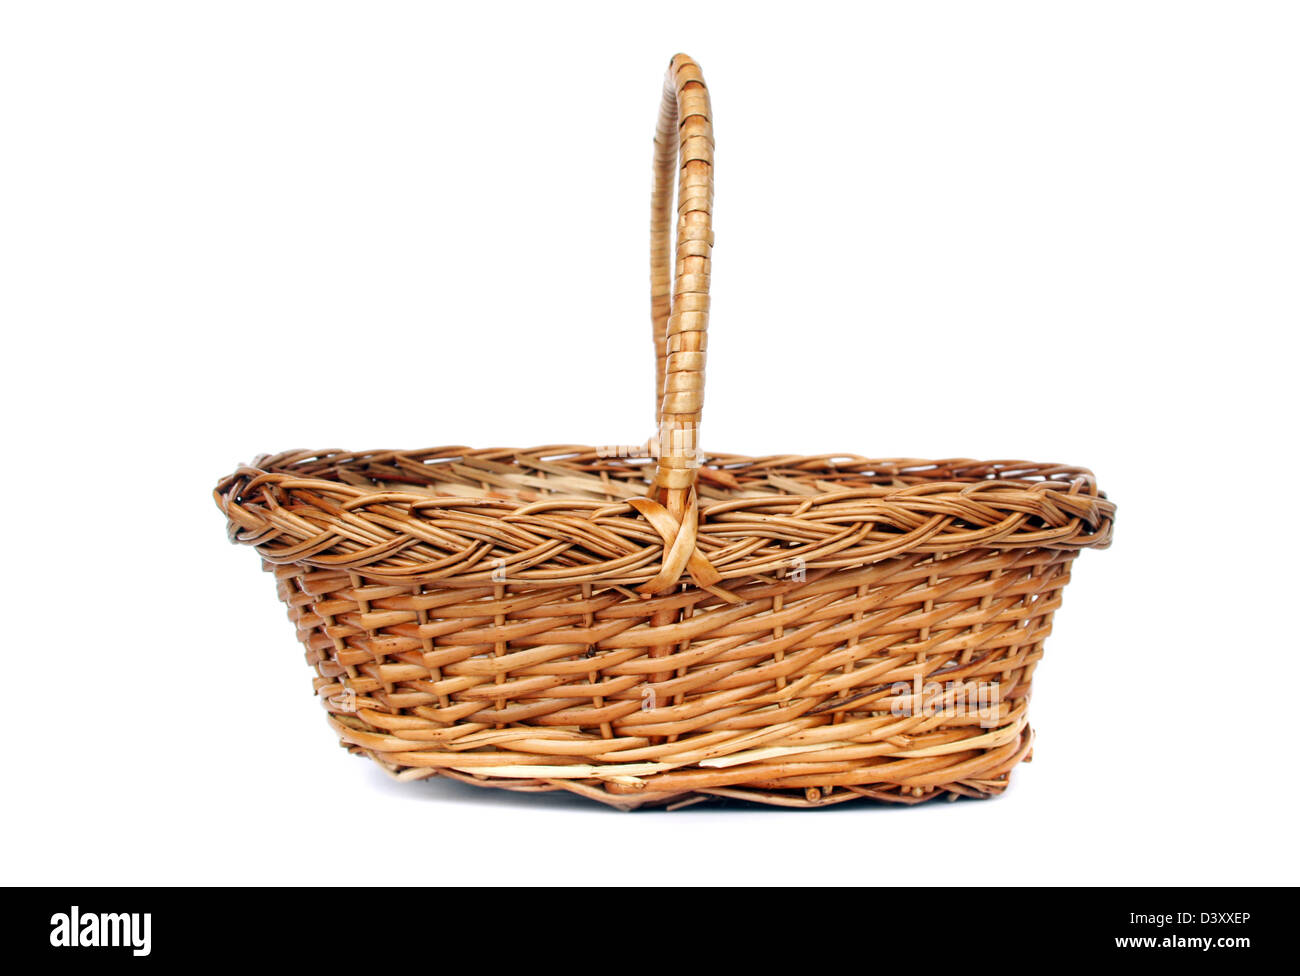 Vintage willow basket for fruits Stock Photo